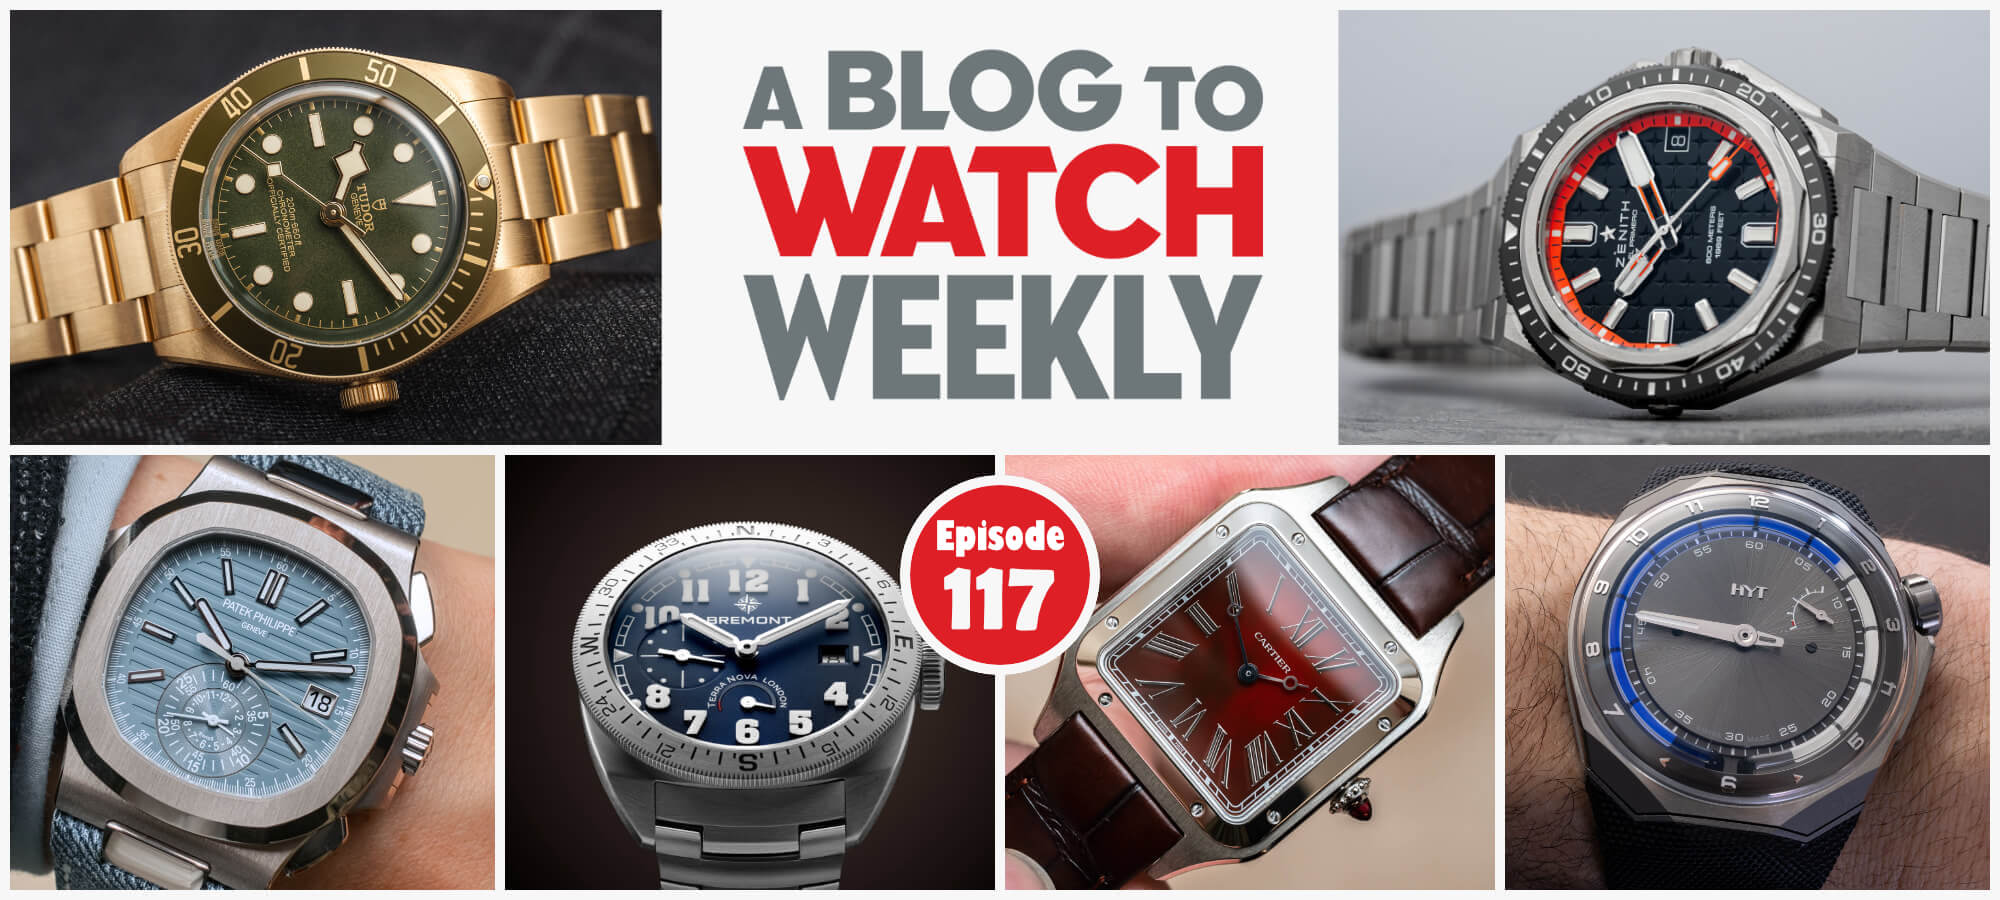 aBlogtoWatch Weekly Episode 117